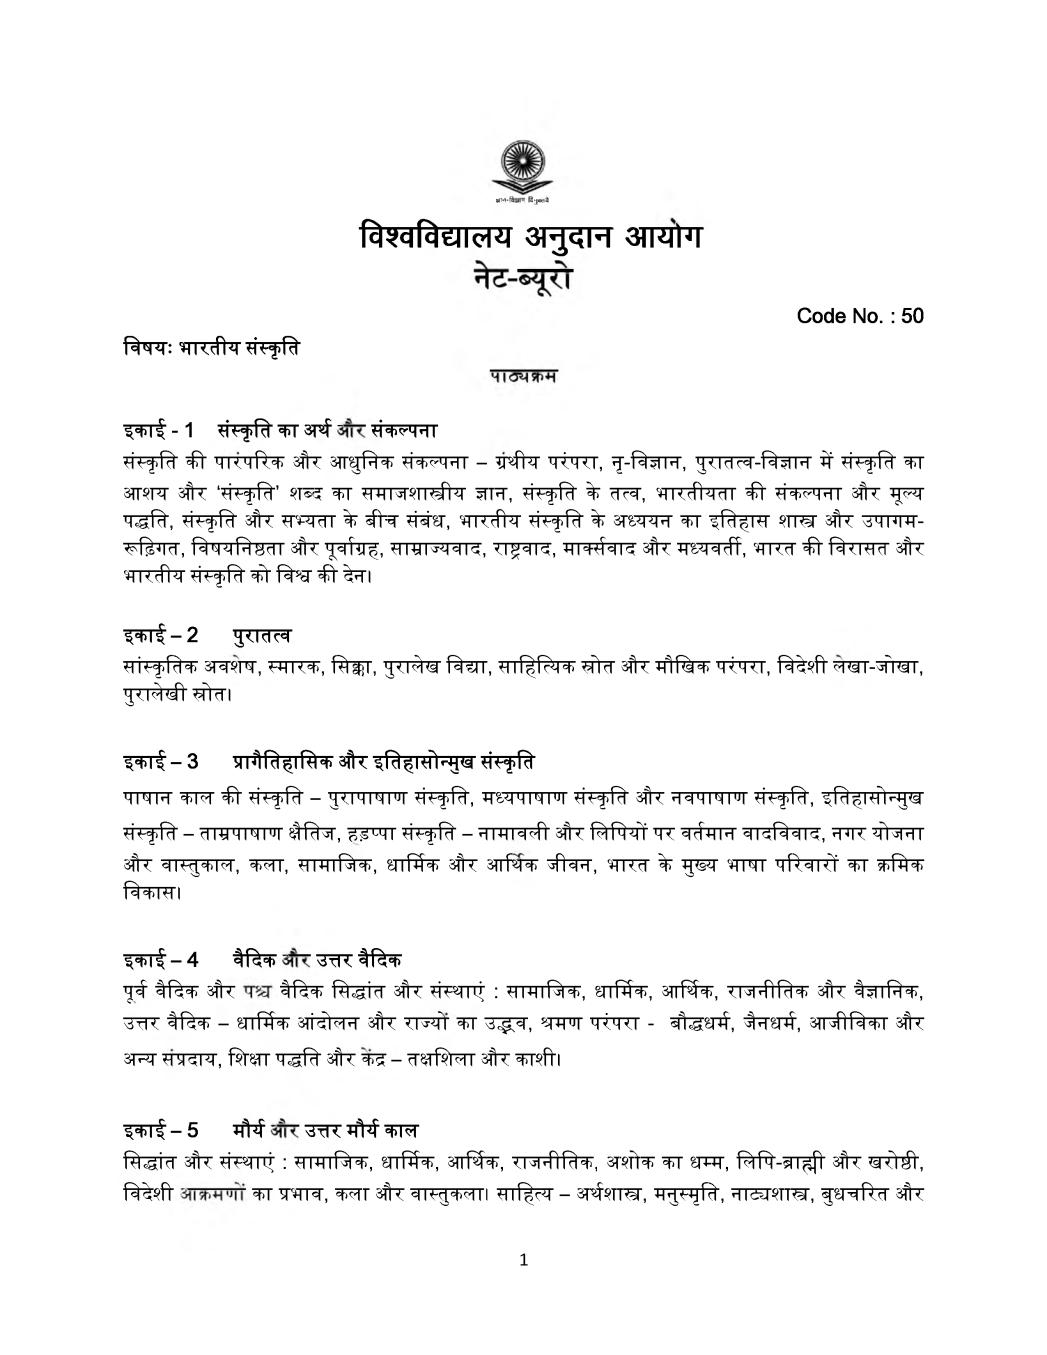 UGC NET Syllabus for Indian Culture 2020 in Hindi - Page 1